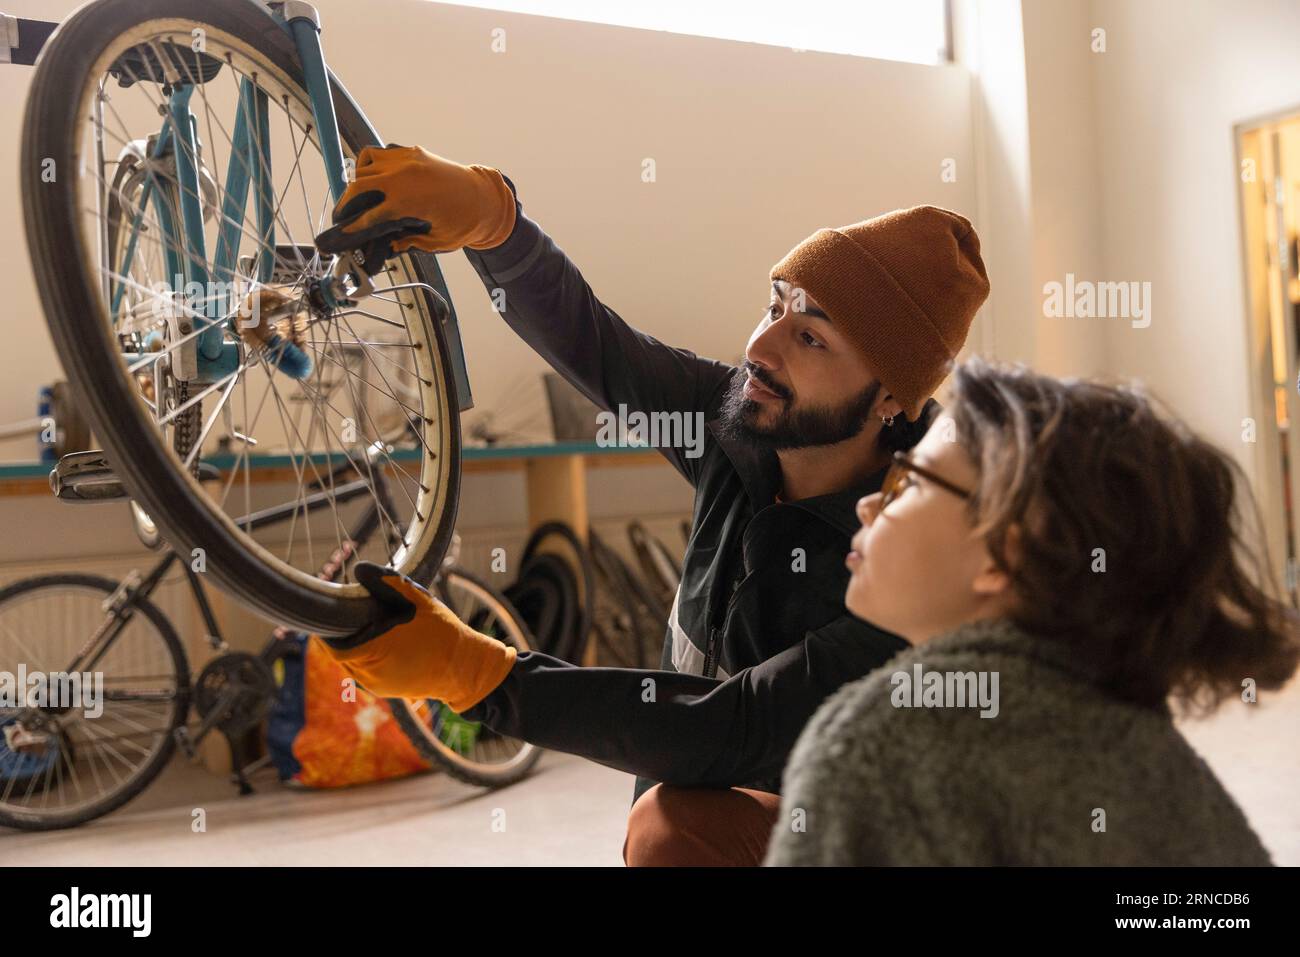 Male technician tightening bicycle wheel by boy at recycling center Stock Photo